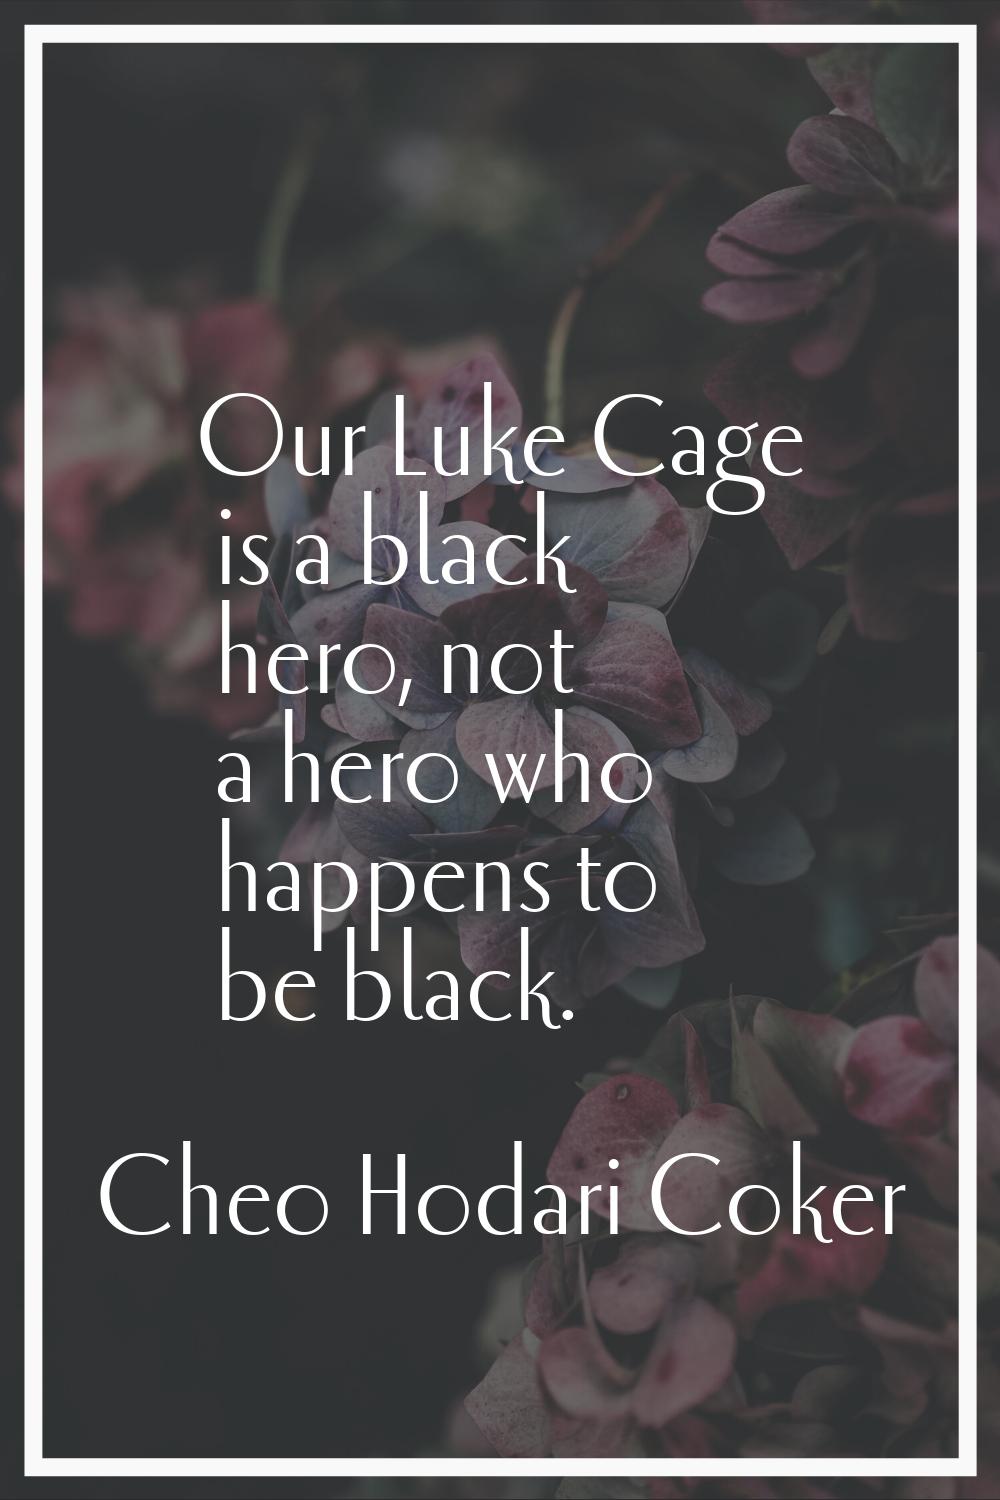 Our Luke Cage is a black hero, not a hero who happens to be black.